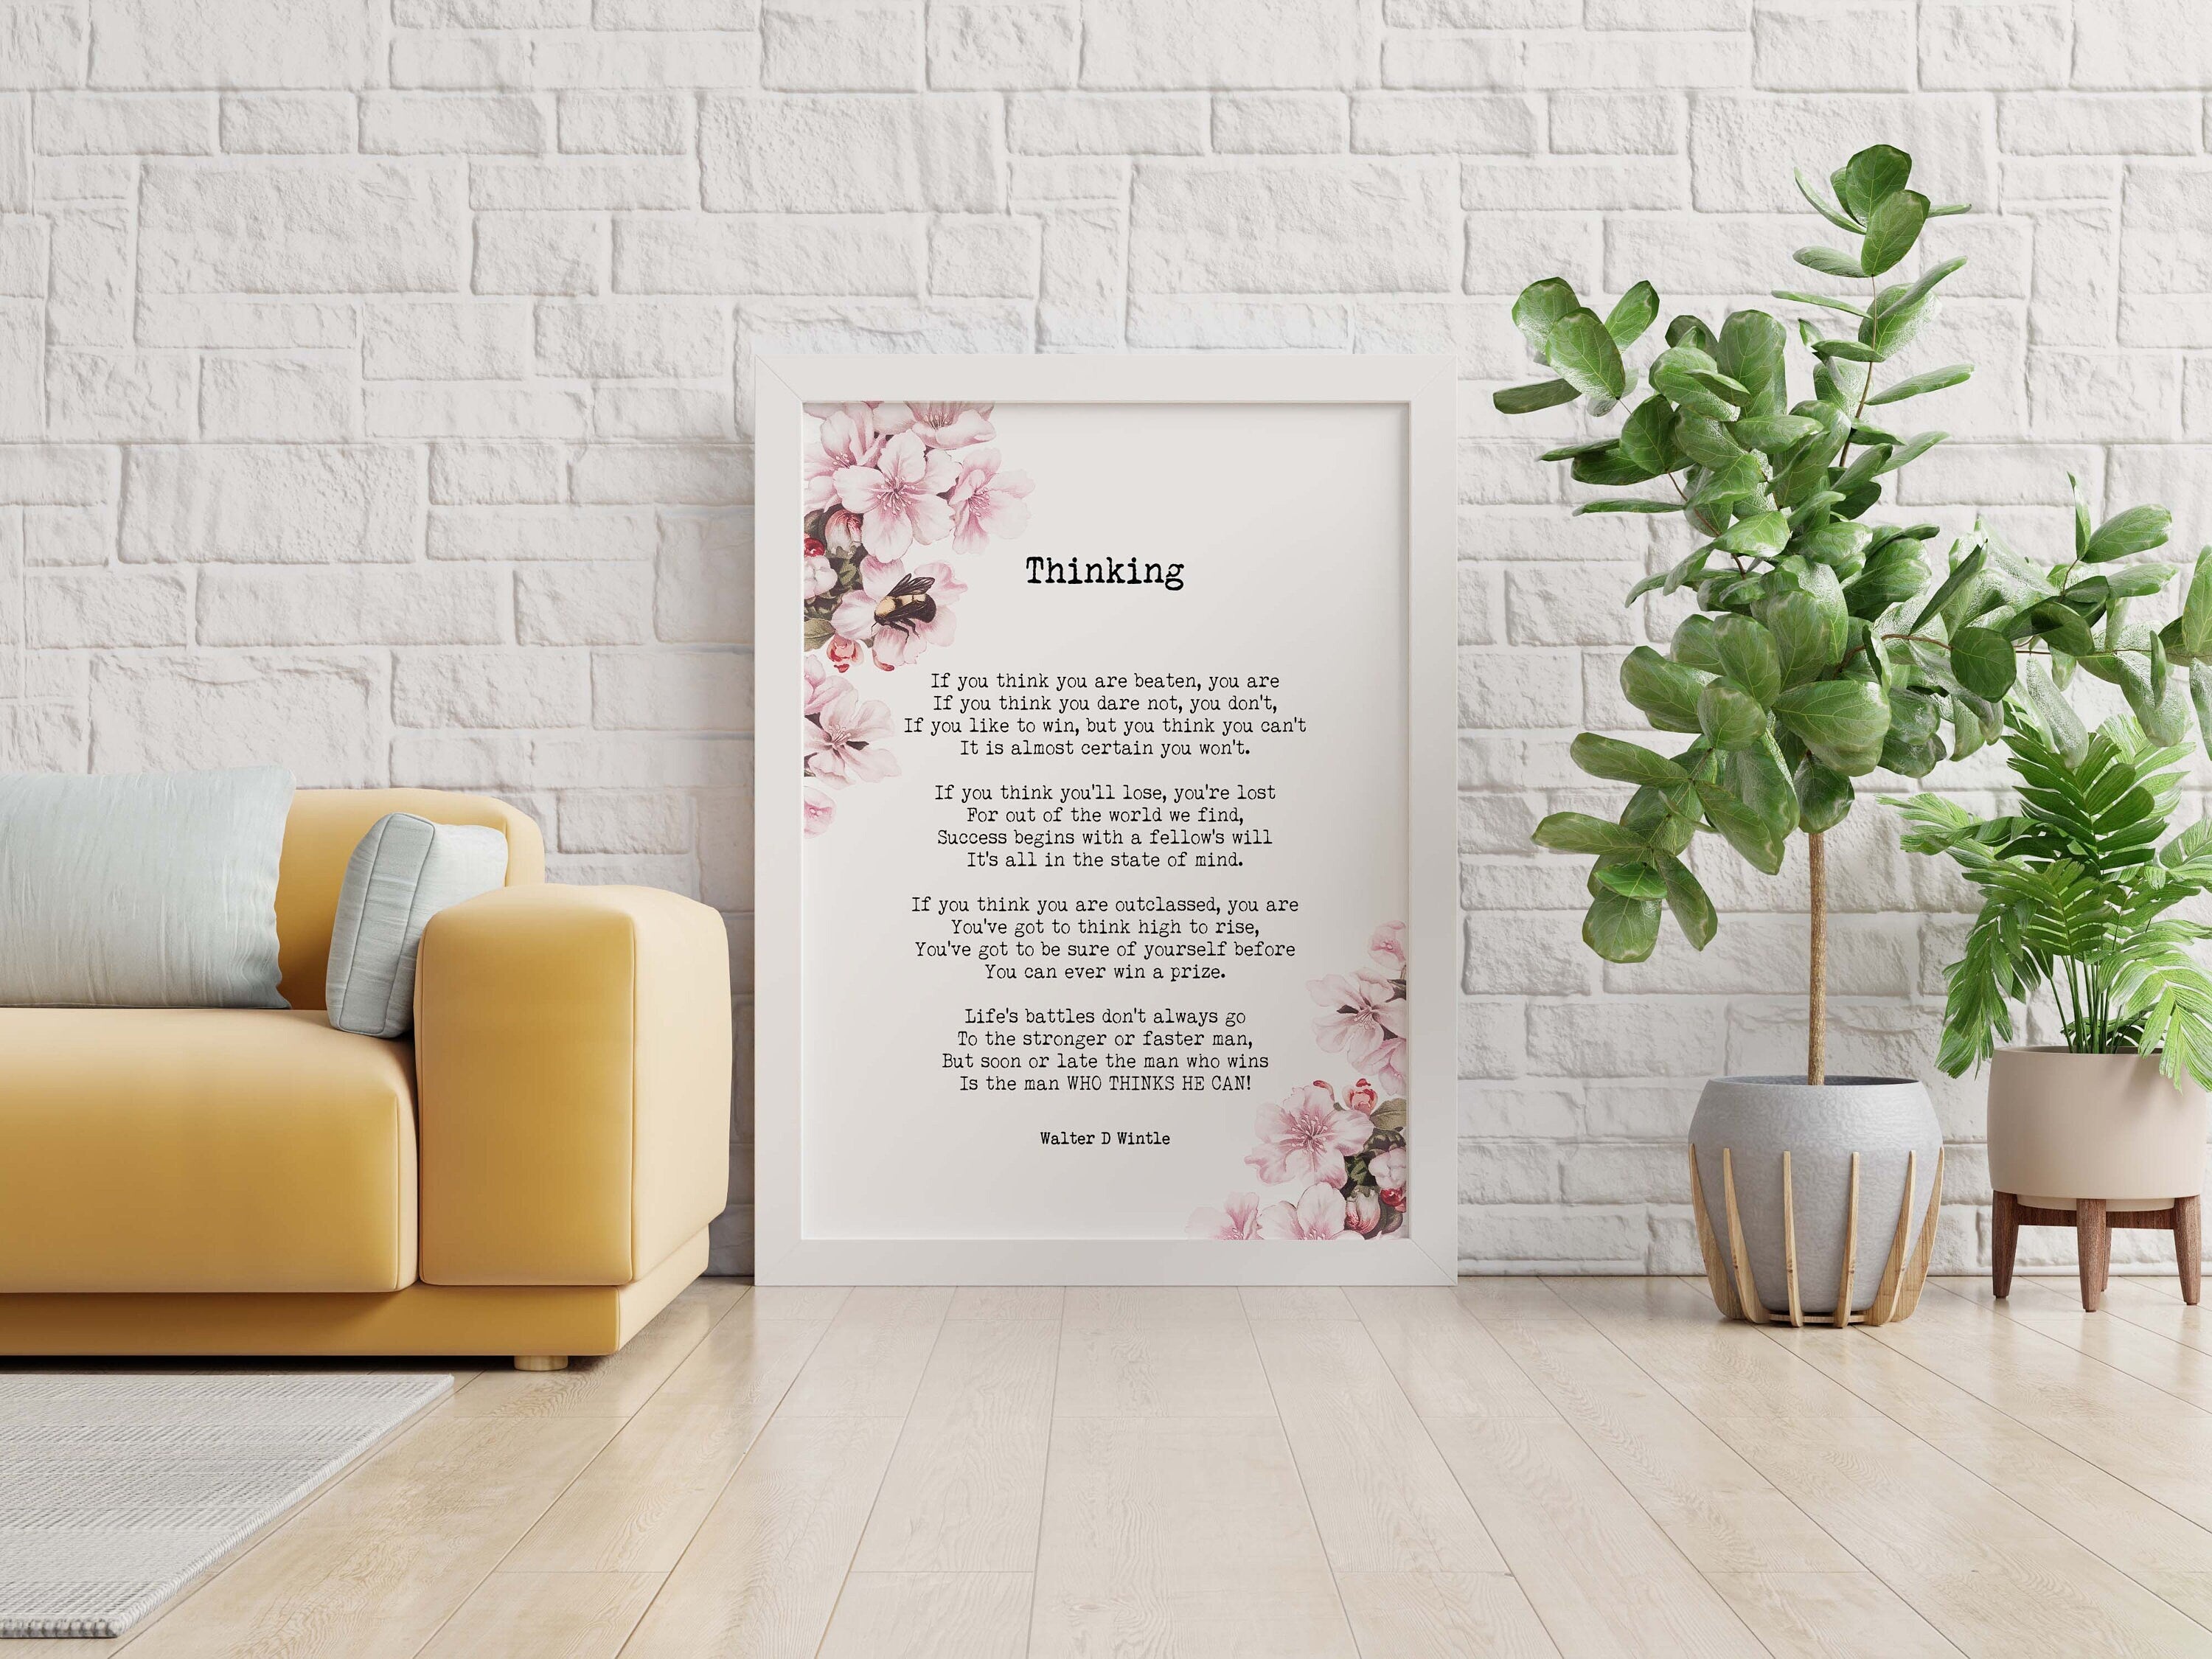 Thinking Walter D Wintle Inspirational Wall Art Prints, Framed and Unframed Watercolour Nature Decor